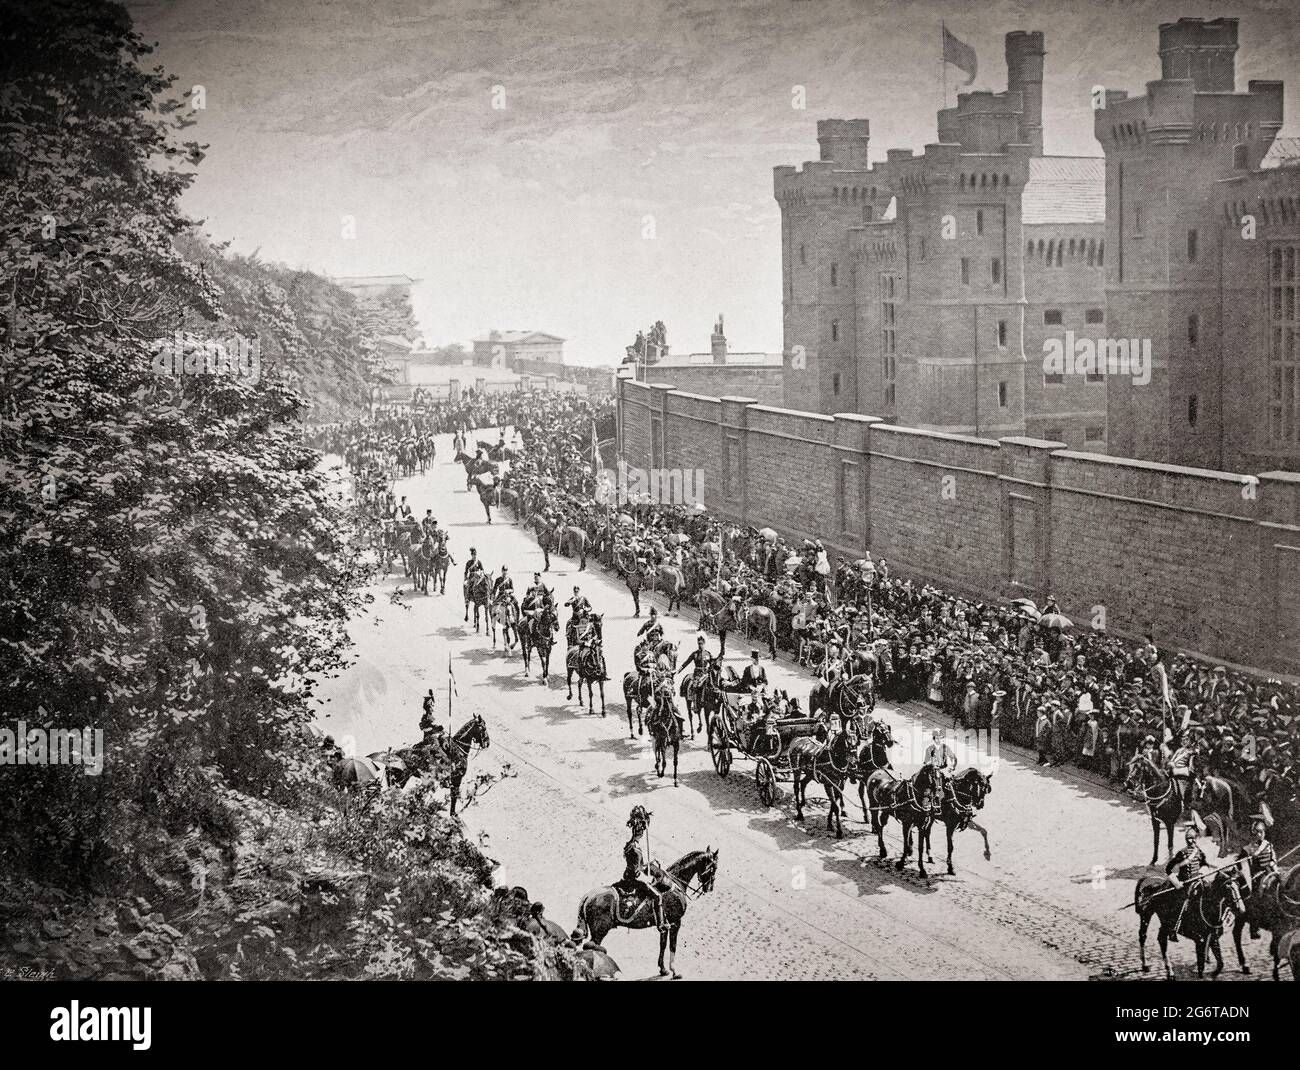 A late 19th century view of  the Commissioner's Walk passing the Calton Gaol in Regent's Terrace, Edinburgh, Scotland. In the carriage with a military escort is the Lord High Commissioner who represents the Sovereign. Stock Photo